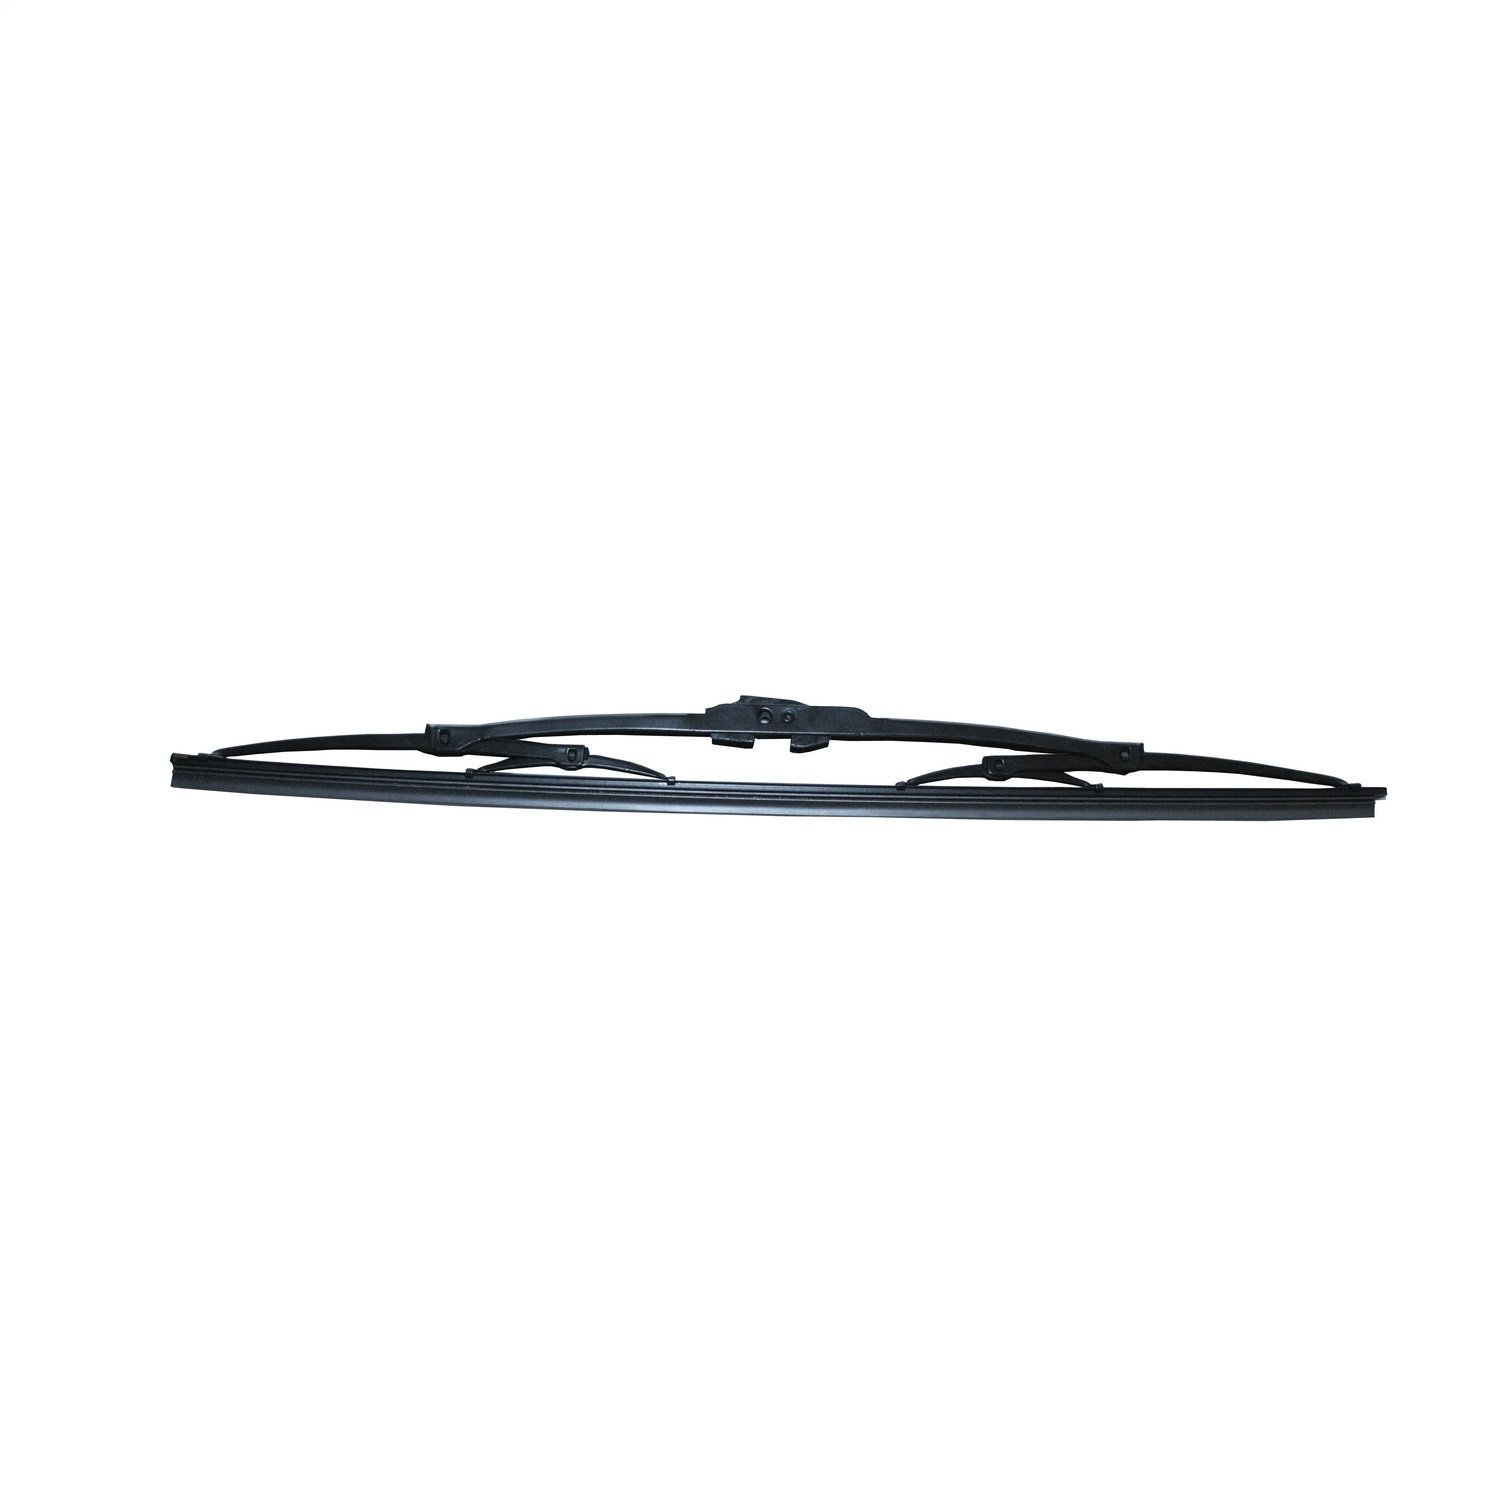 This 18 inch wiper blade from Omix-ADA fits the rear hardtop window on 97-06 Jeep Wrangler and the w